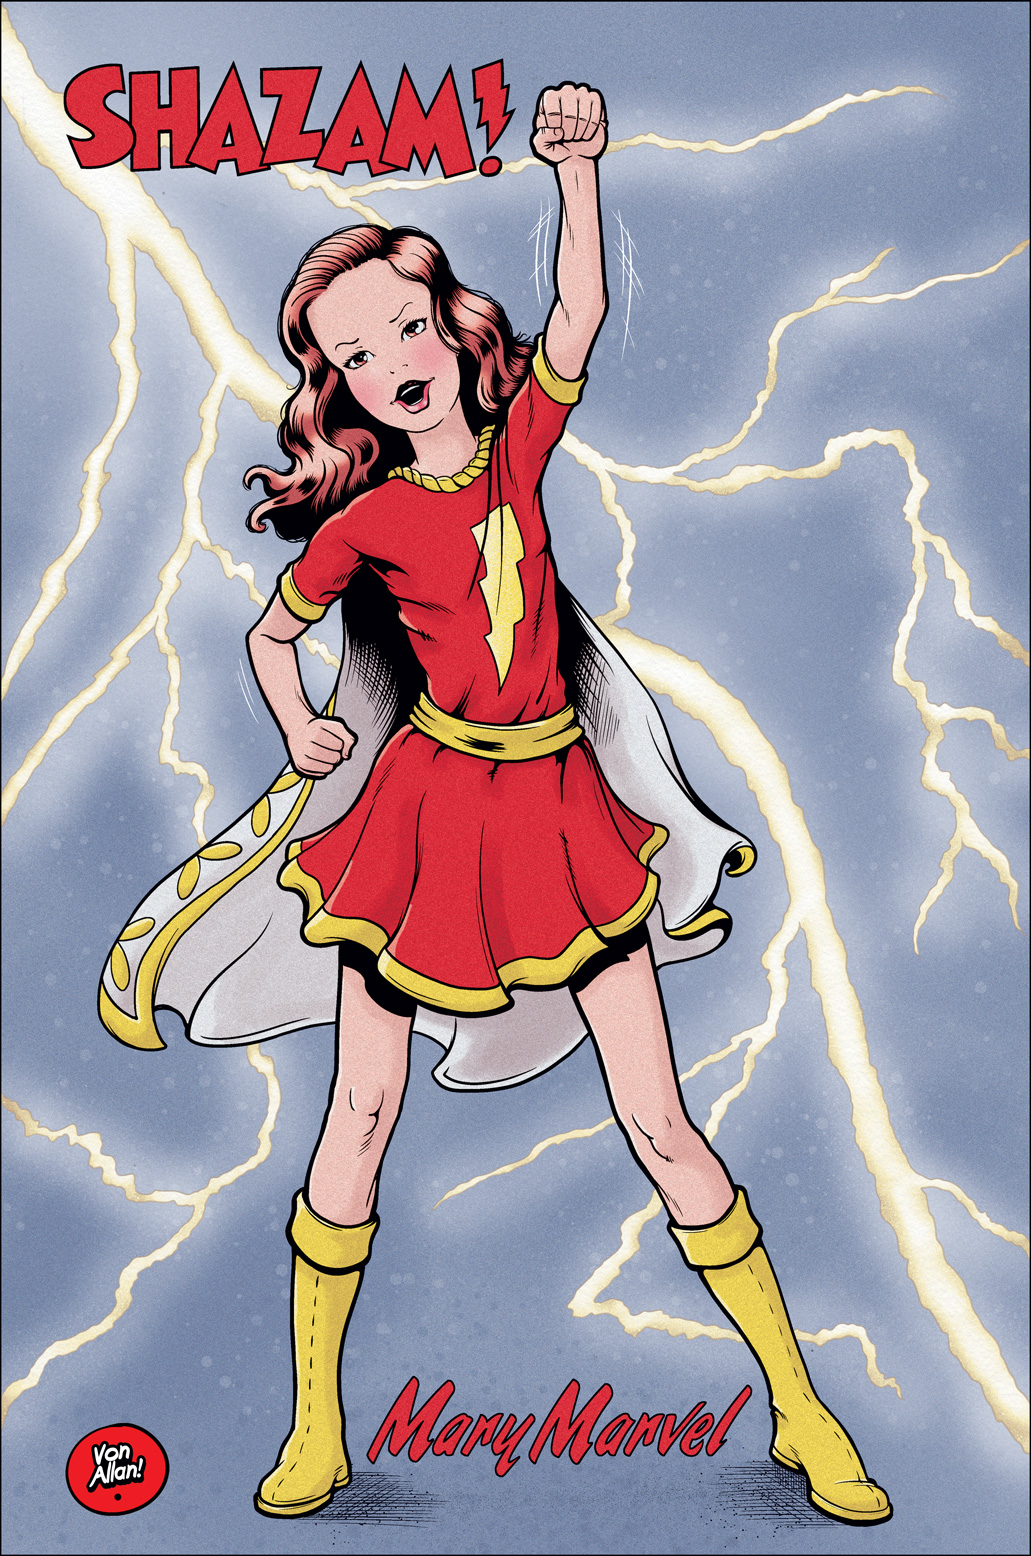 A younger version of Mary Marvel by illustrator Von Allan